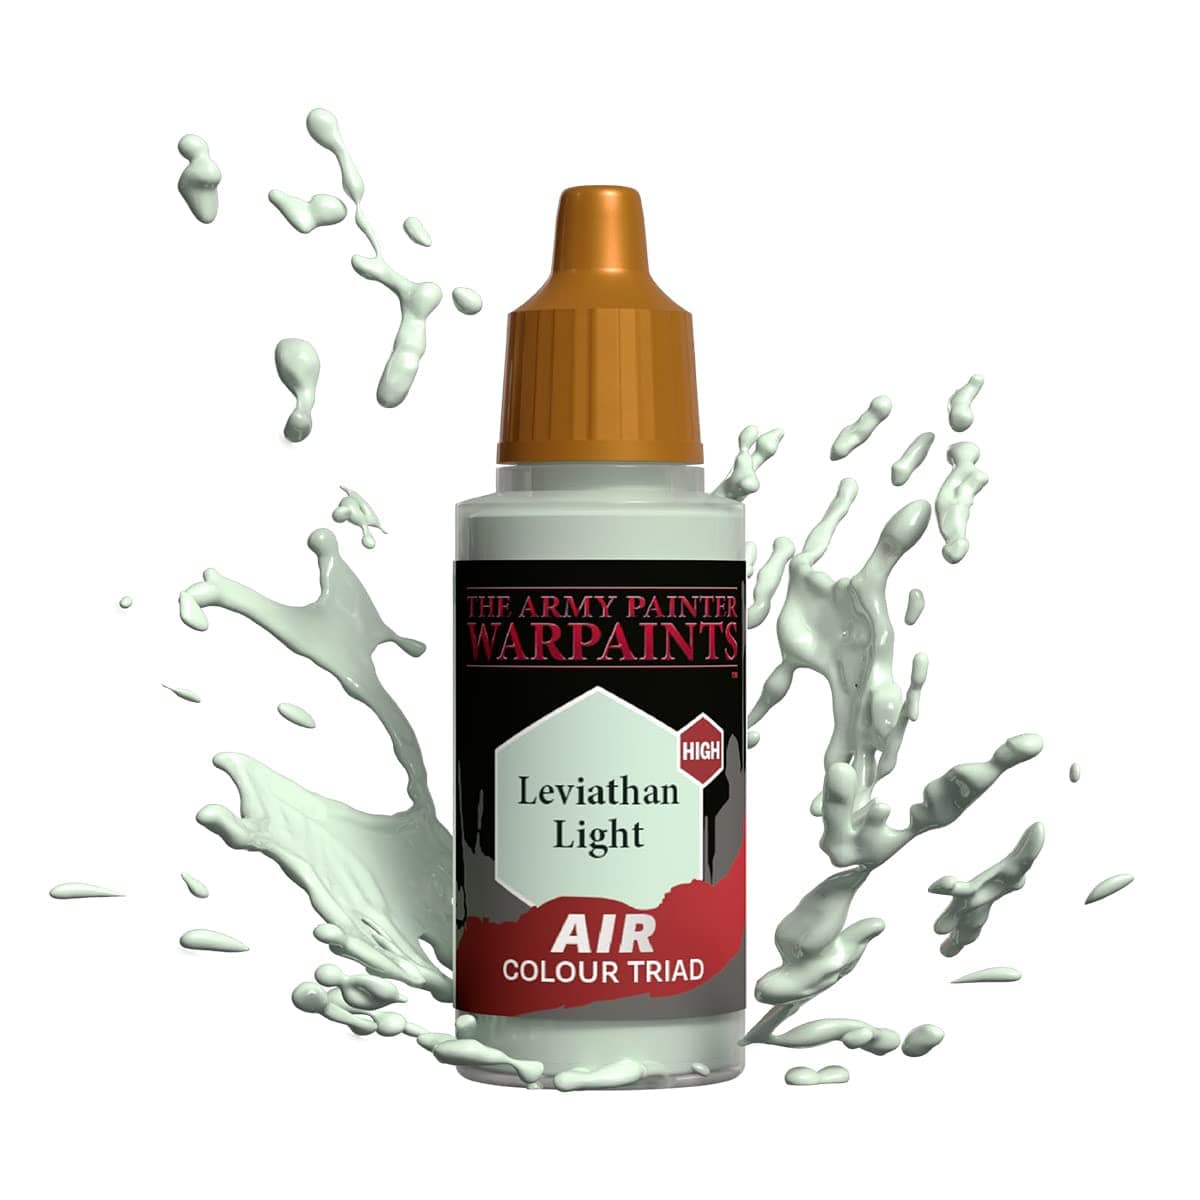 The Army Painter Accessories The Army Painter Warpaints Air: Leviathan Light 18ml